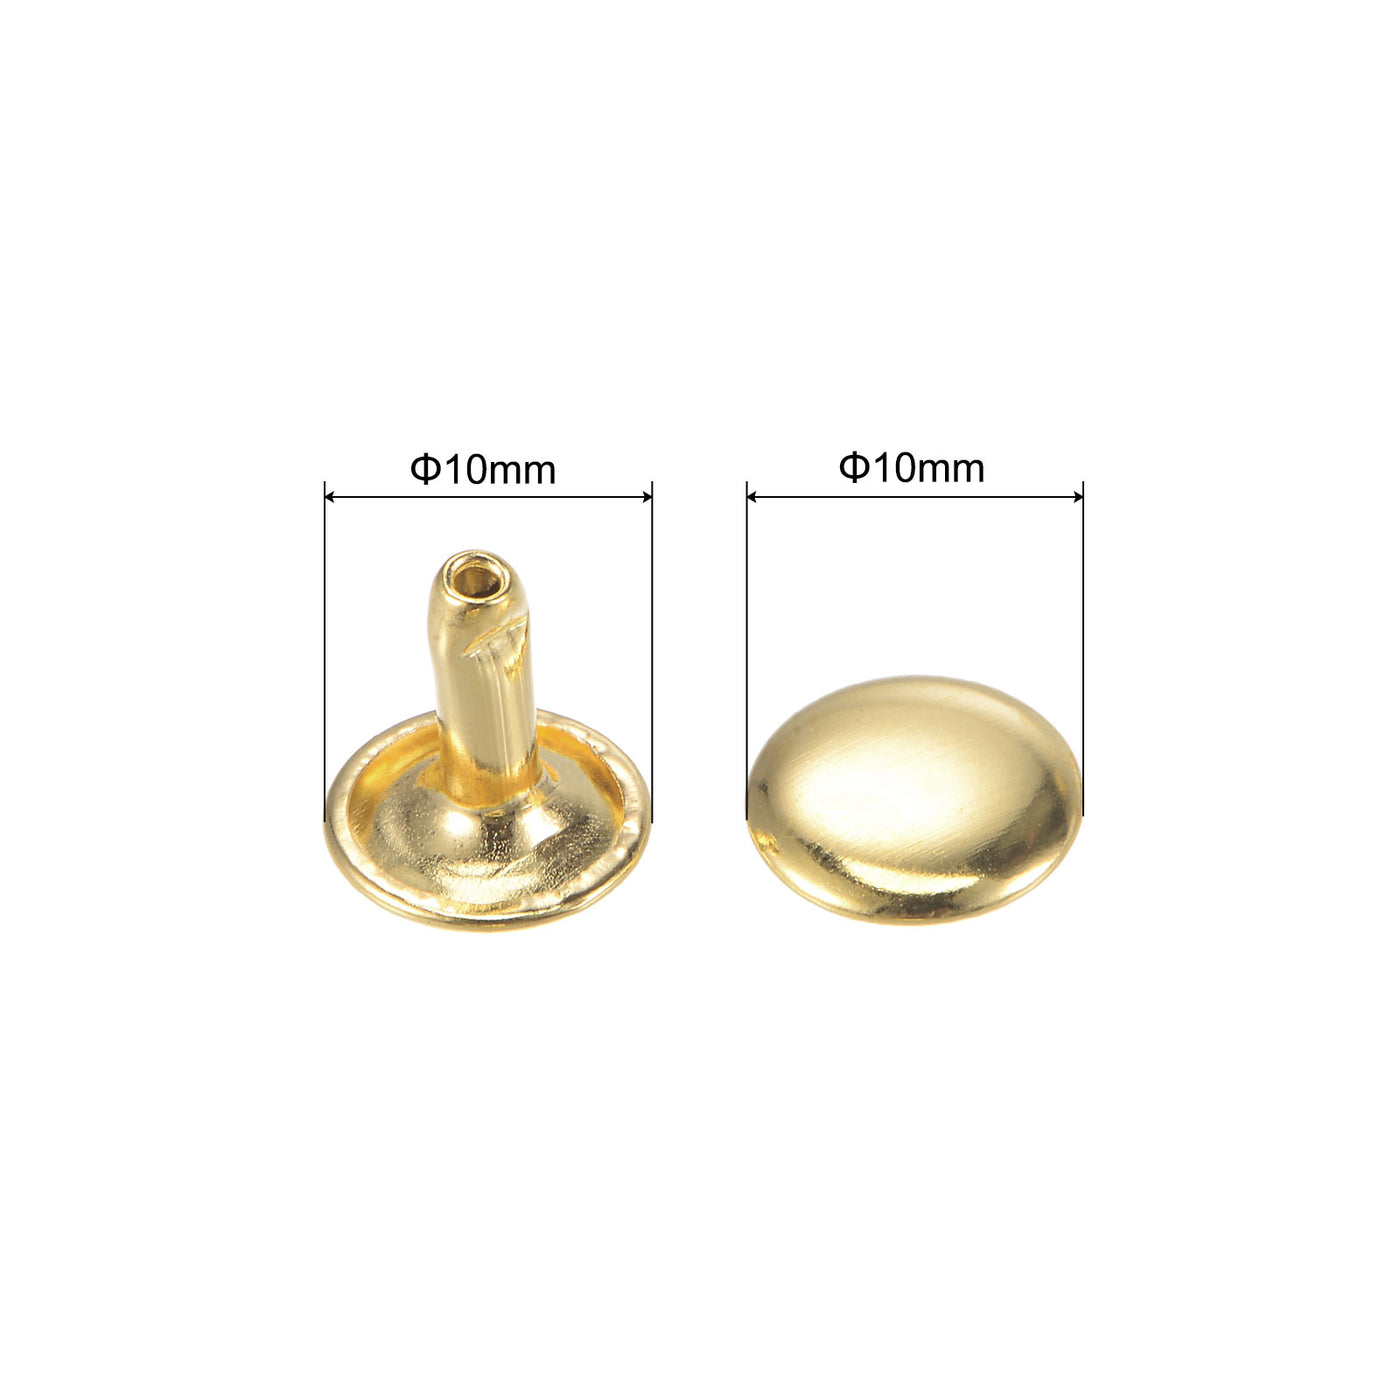 uxcell Uxcell 20 Sets Leather Rivets Gold Tone 10mm Double Cap Brass Rivet Leather Studs